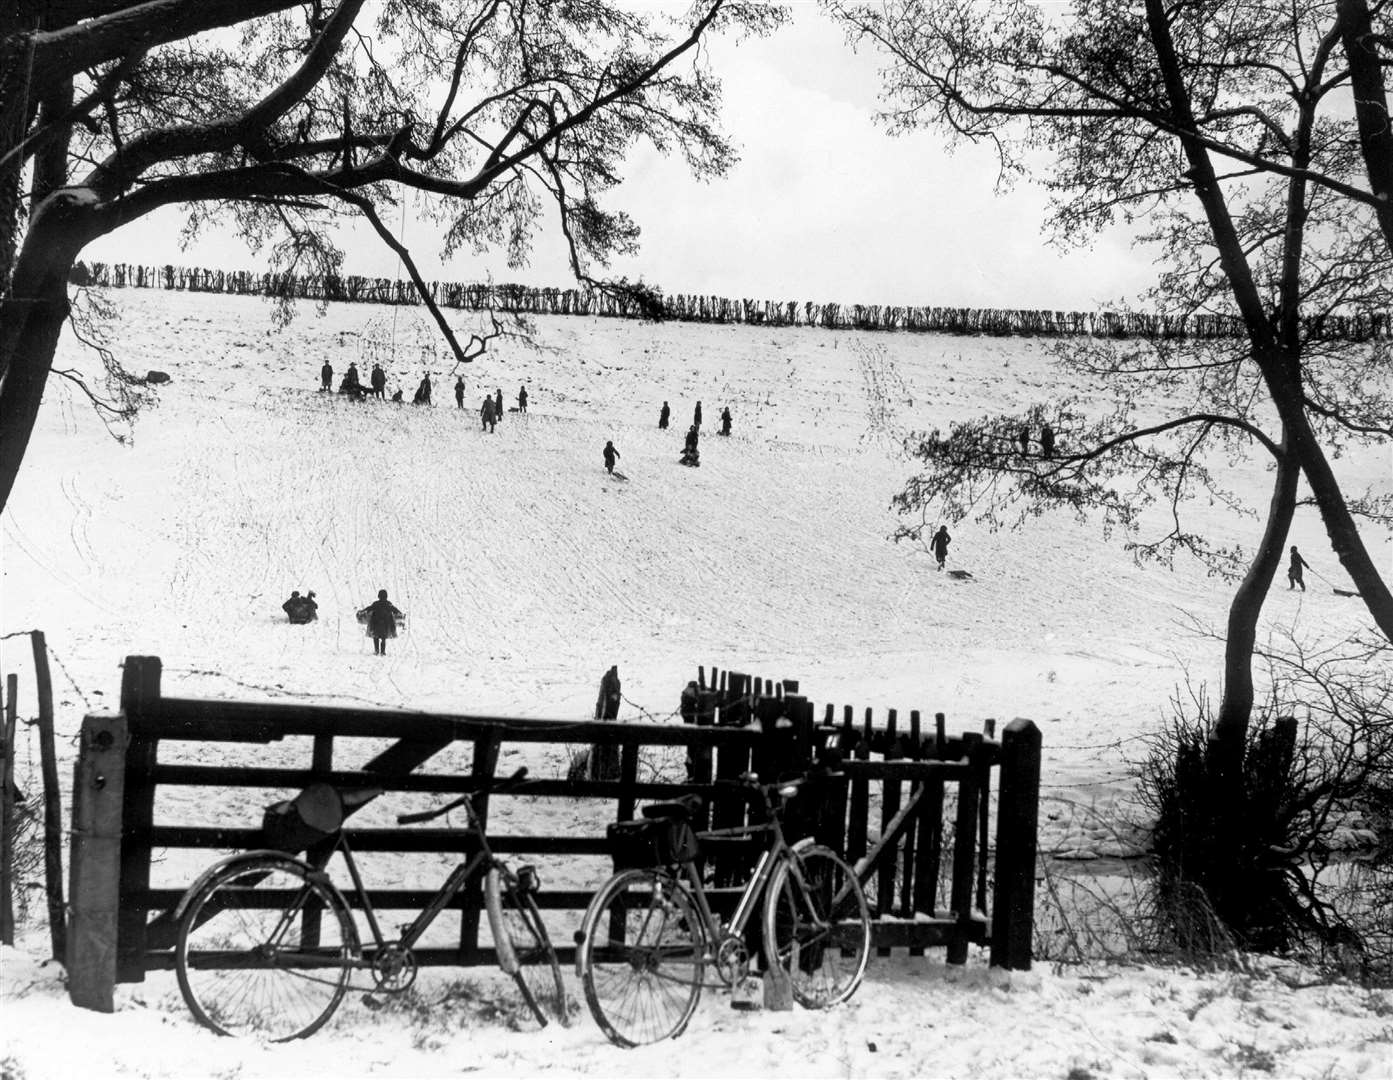 Children playing in the snow near Maidstone in February 1954